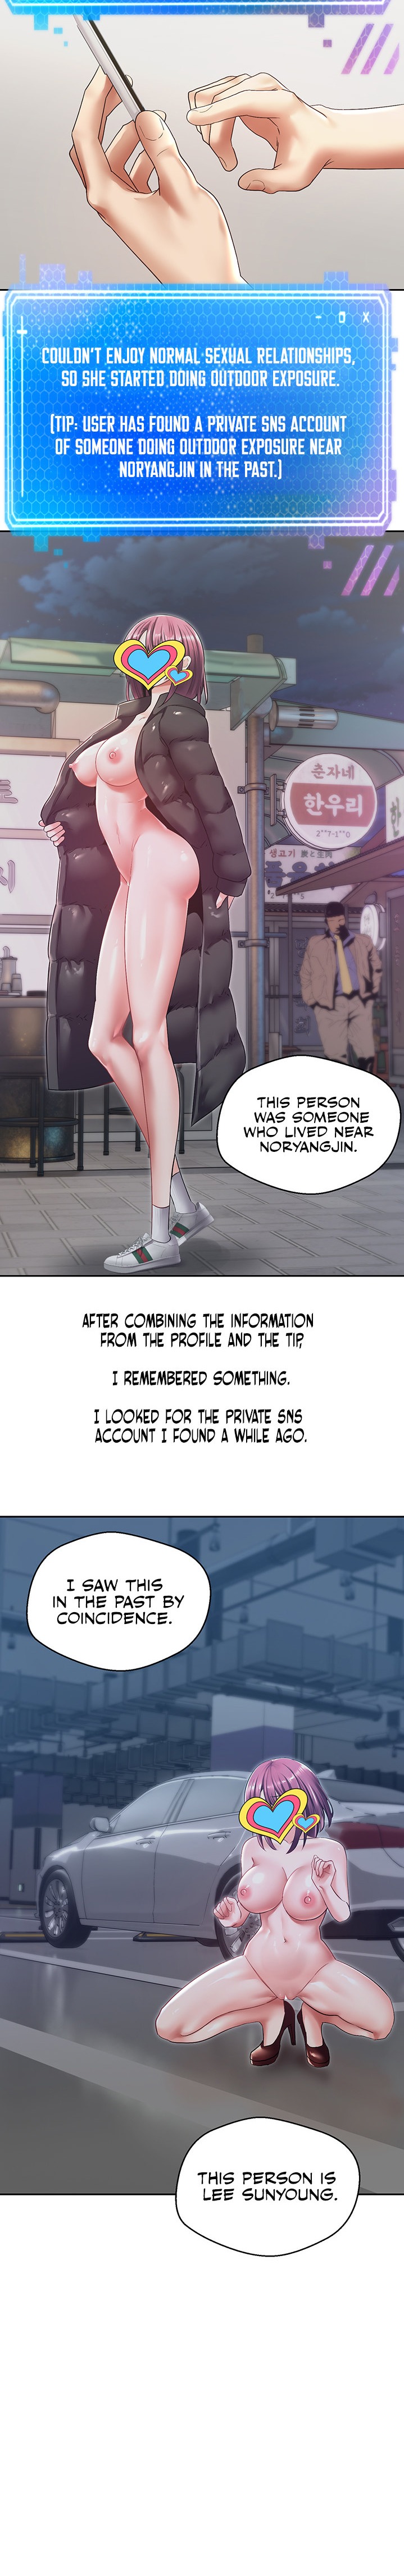 Desire Realization App - Chapter 4 Page 20